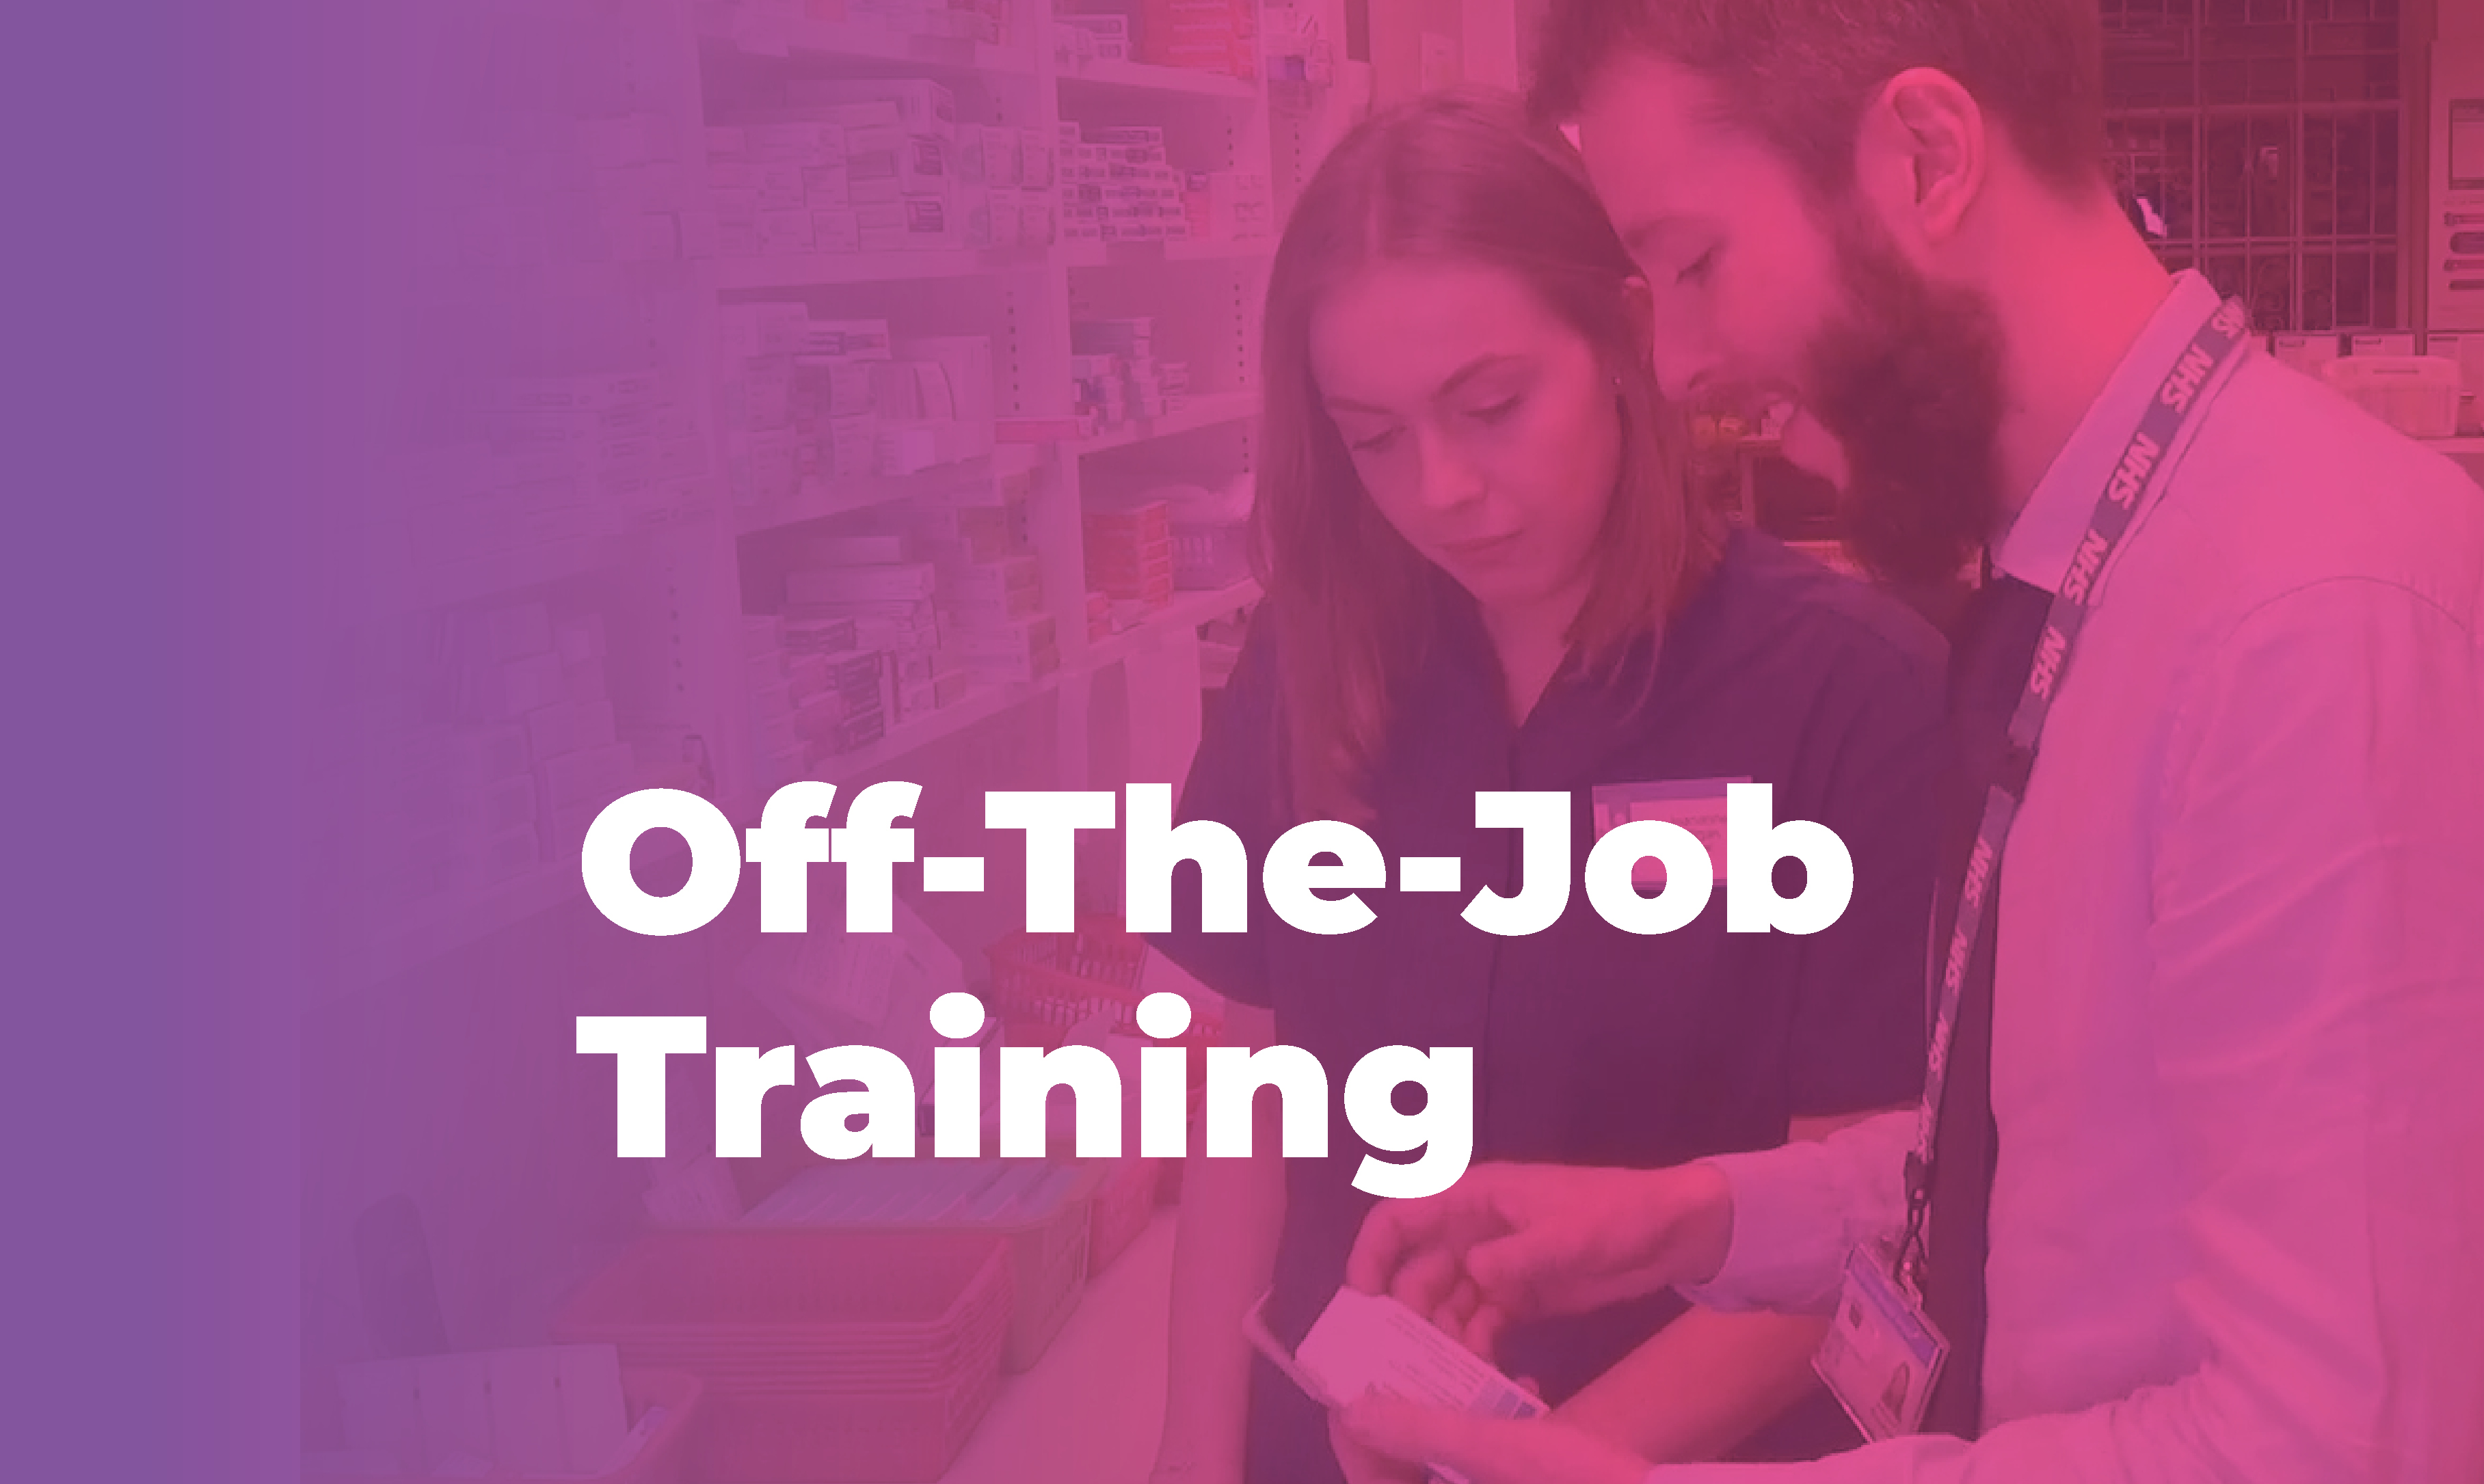 Off the job guided learning hours